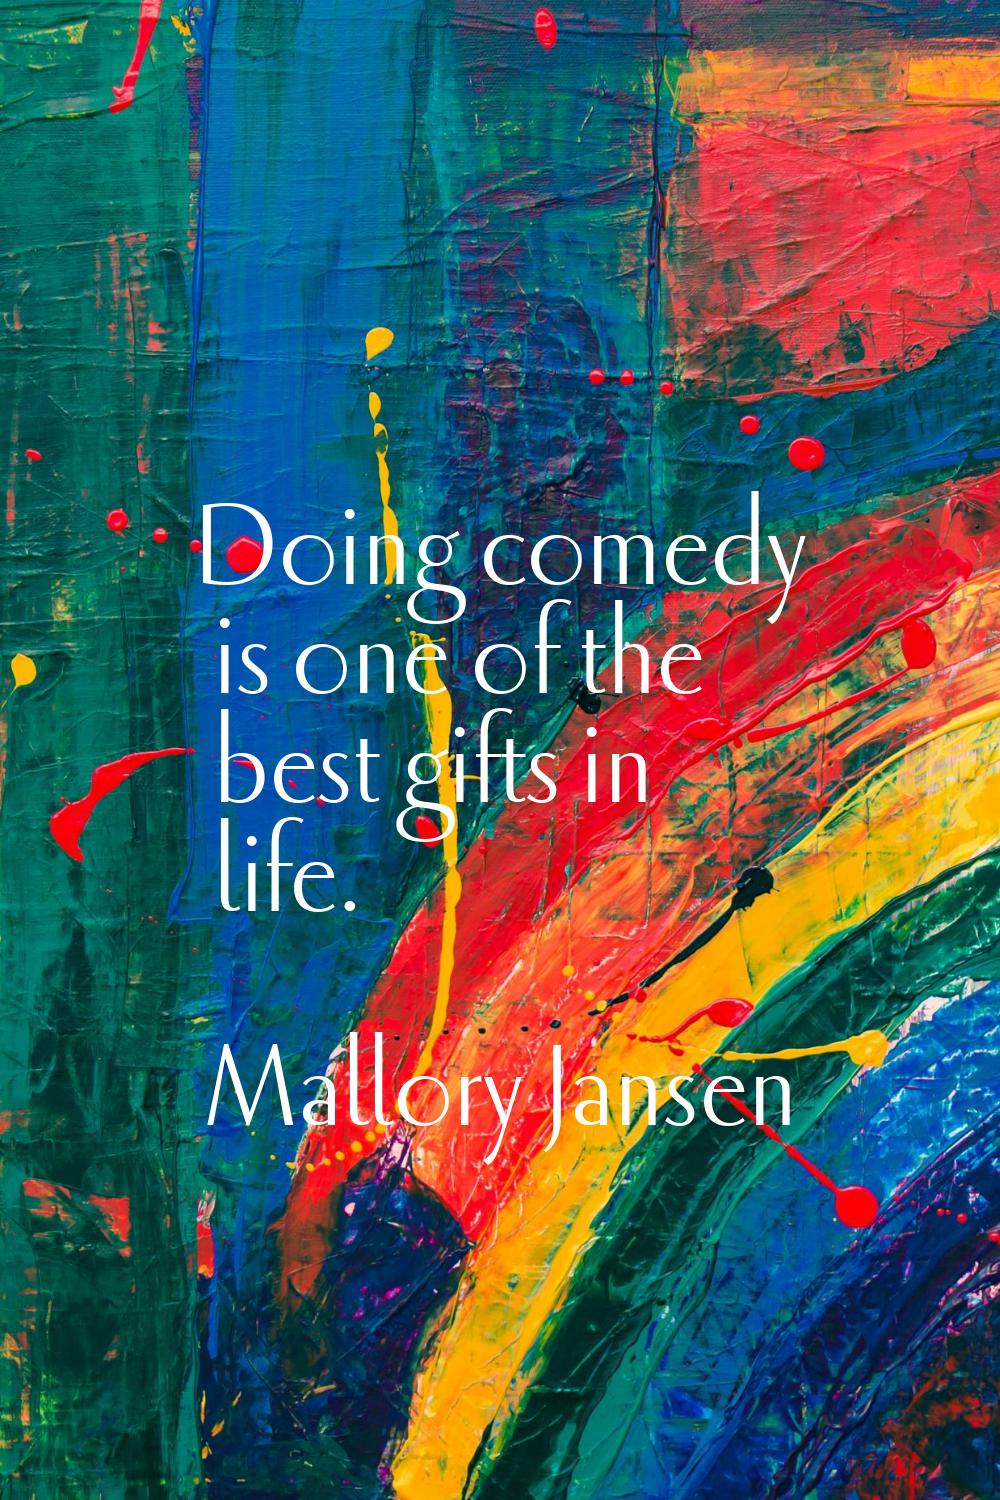 Doing comedy is one of the best gifts in life.